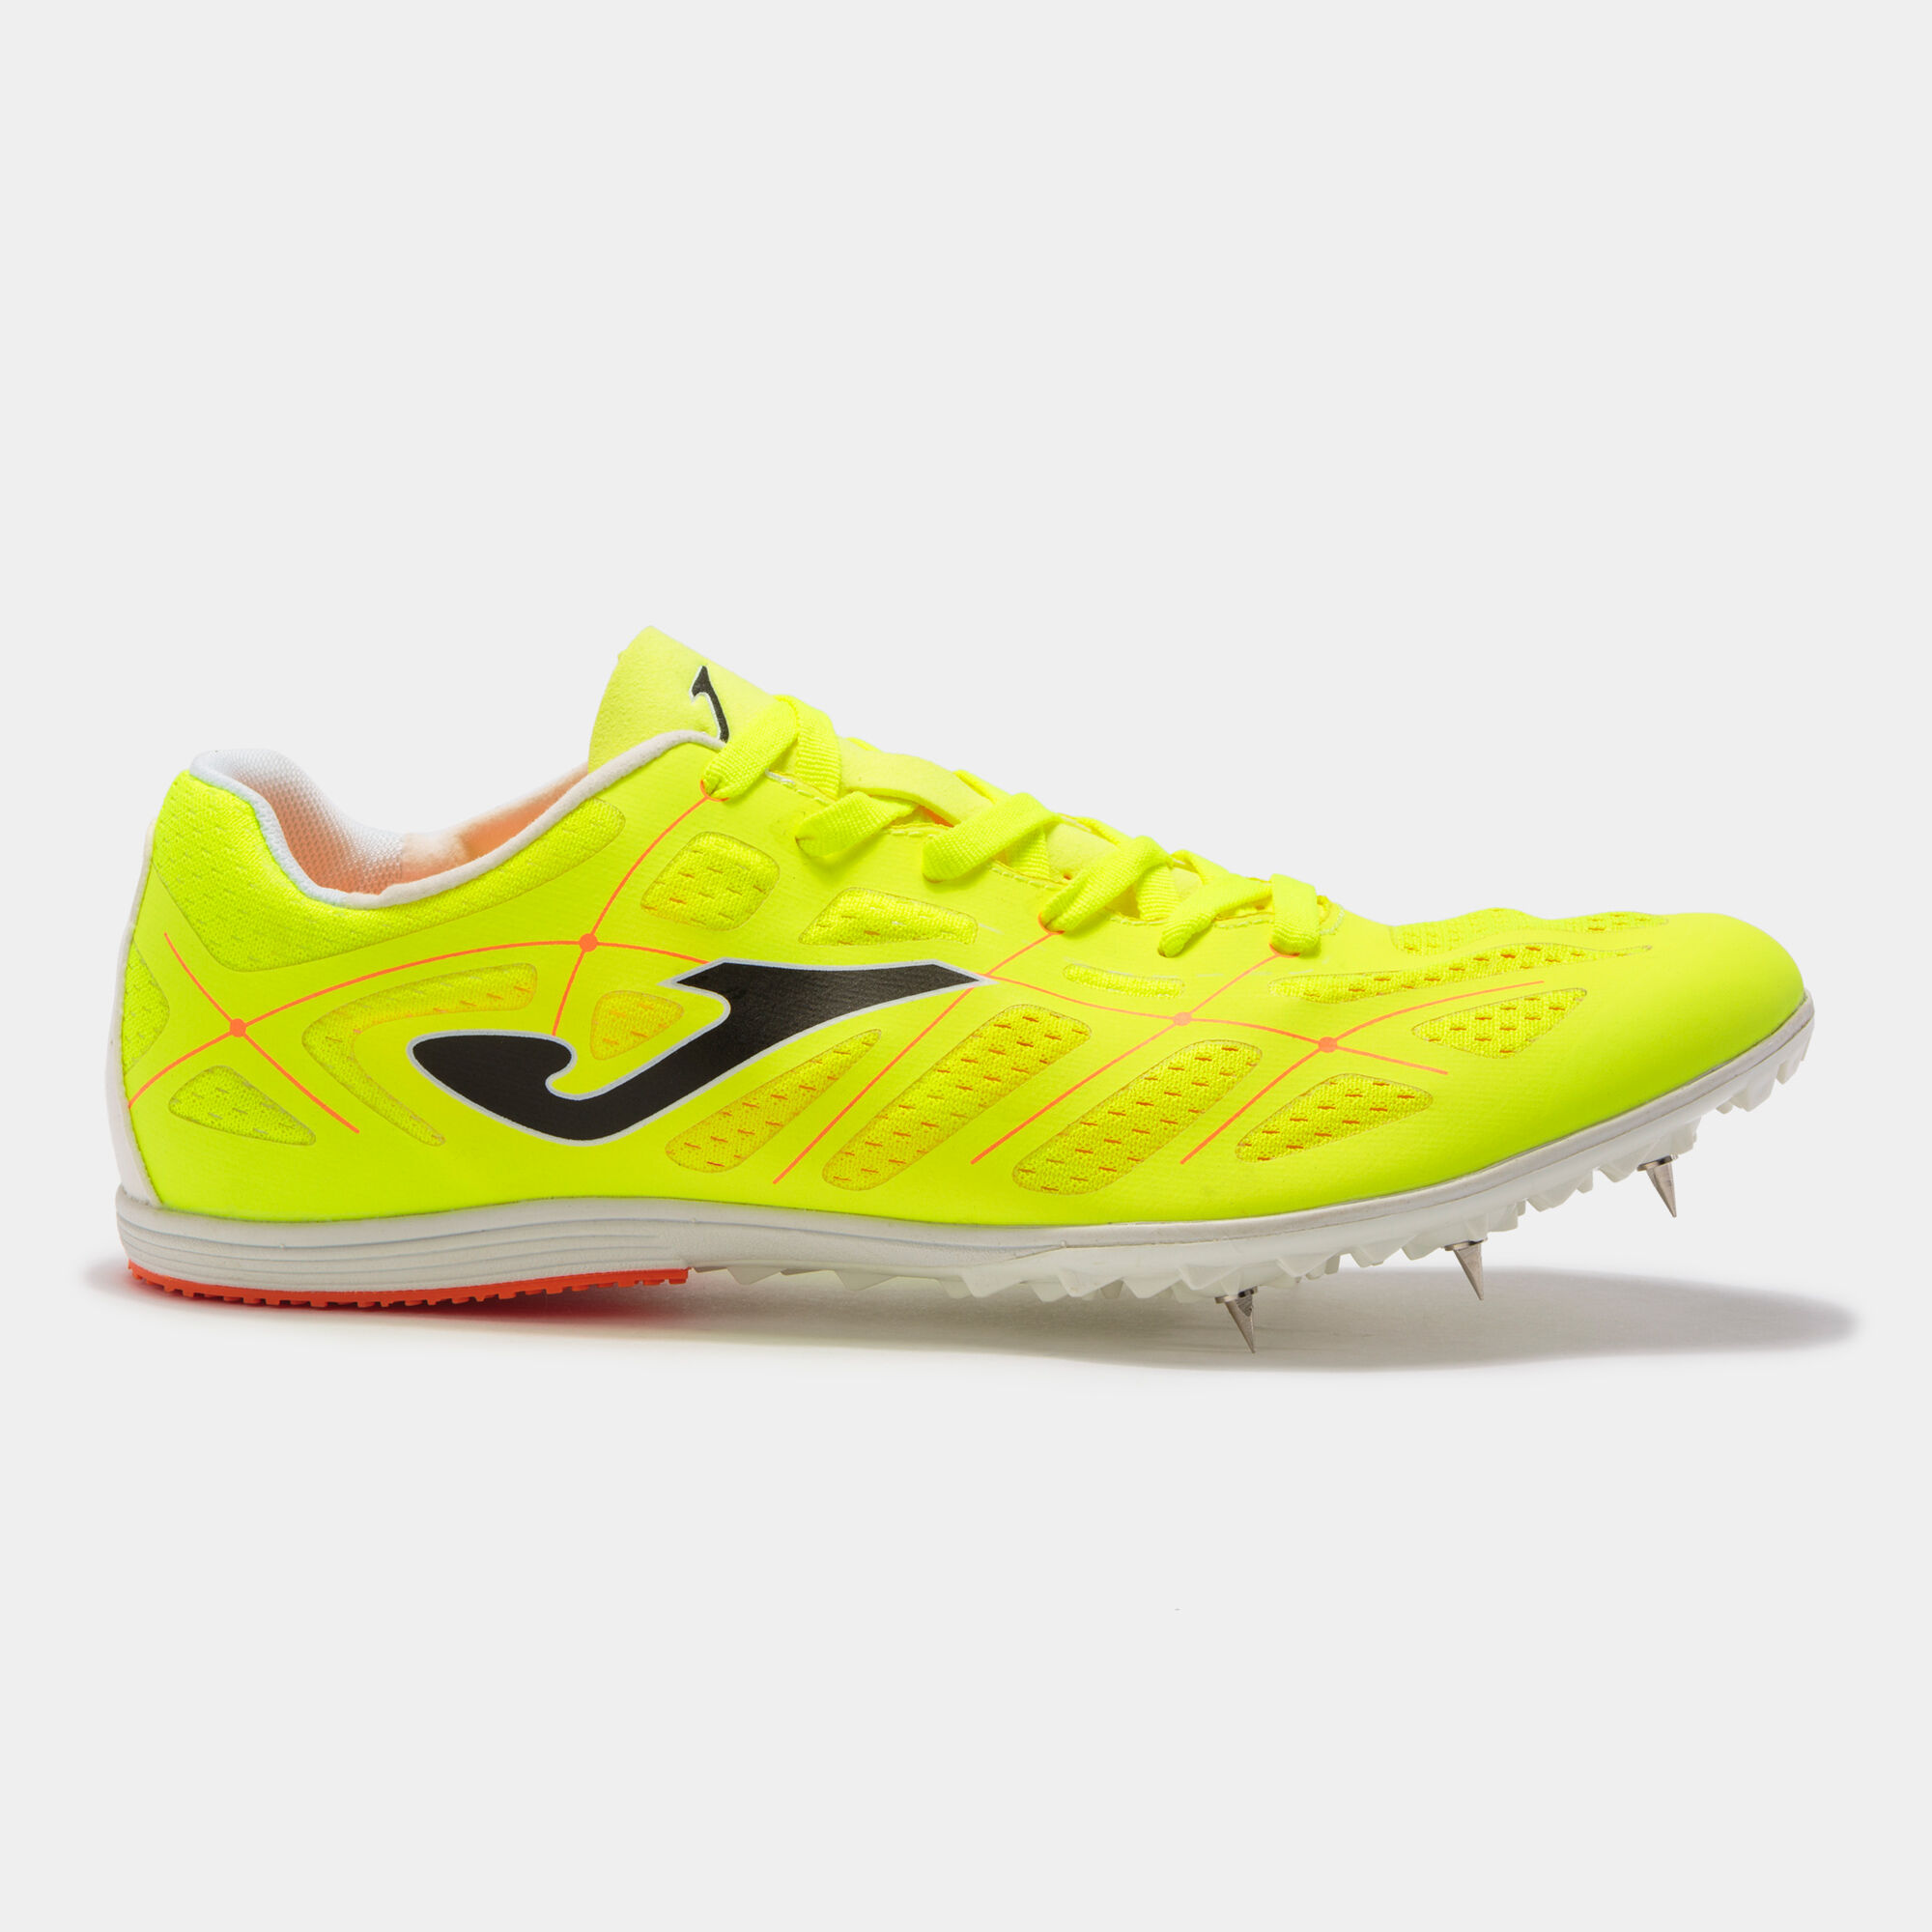 RUNNING SHOES 6729 SPIKES CLAVES UNISEX FLUORESCENT YELLOW